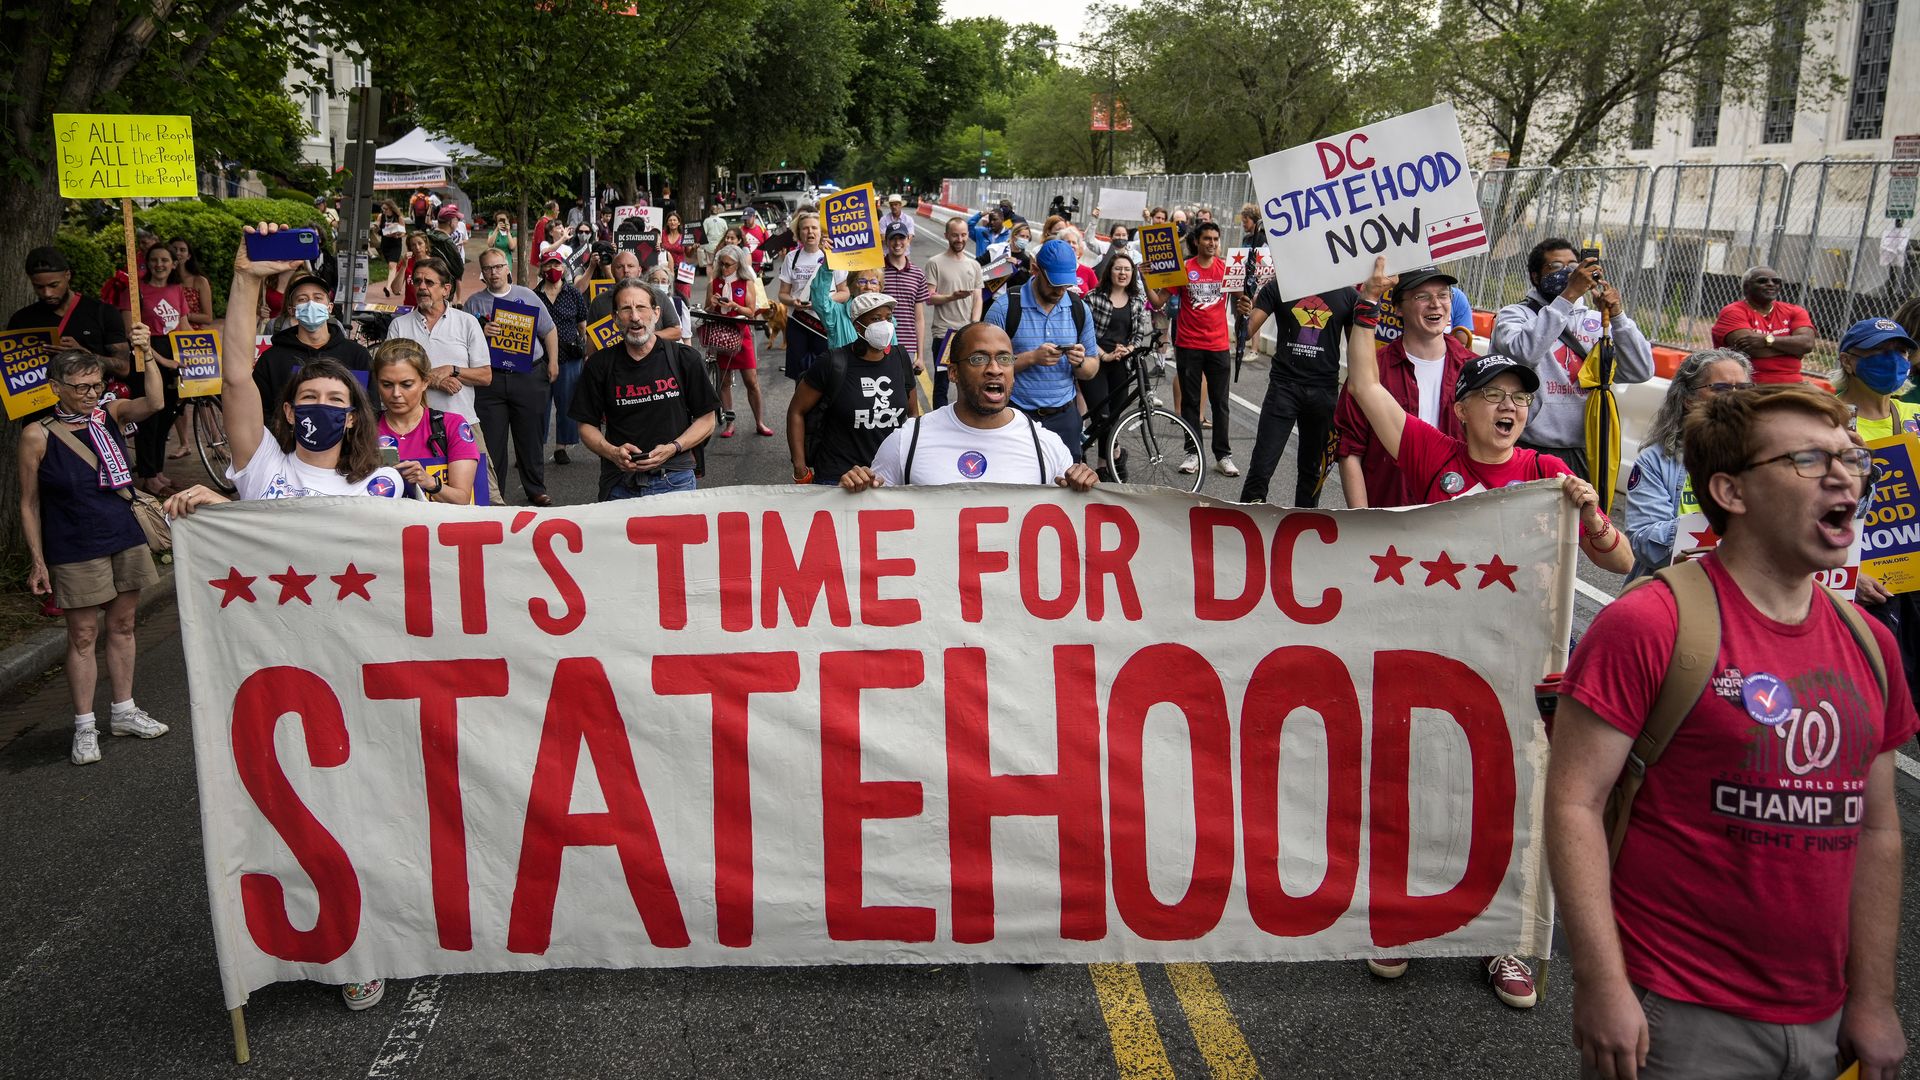 Supporters of D.C. statehood hold a large banner while marching down a street